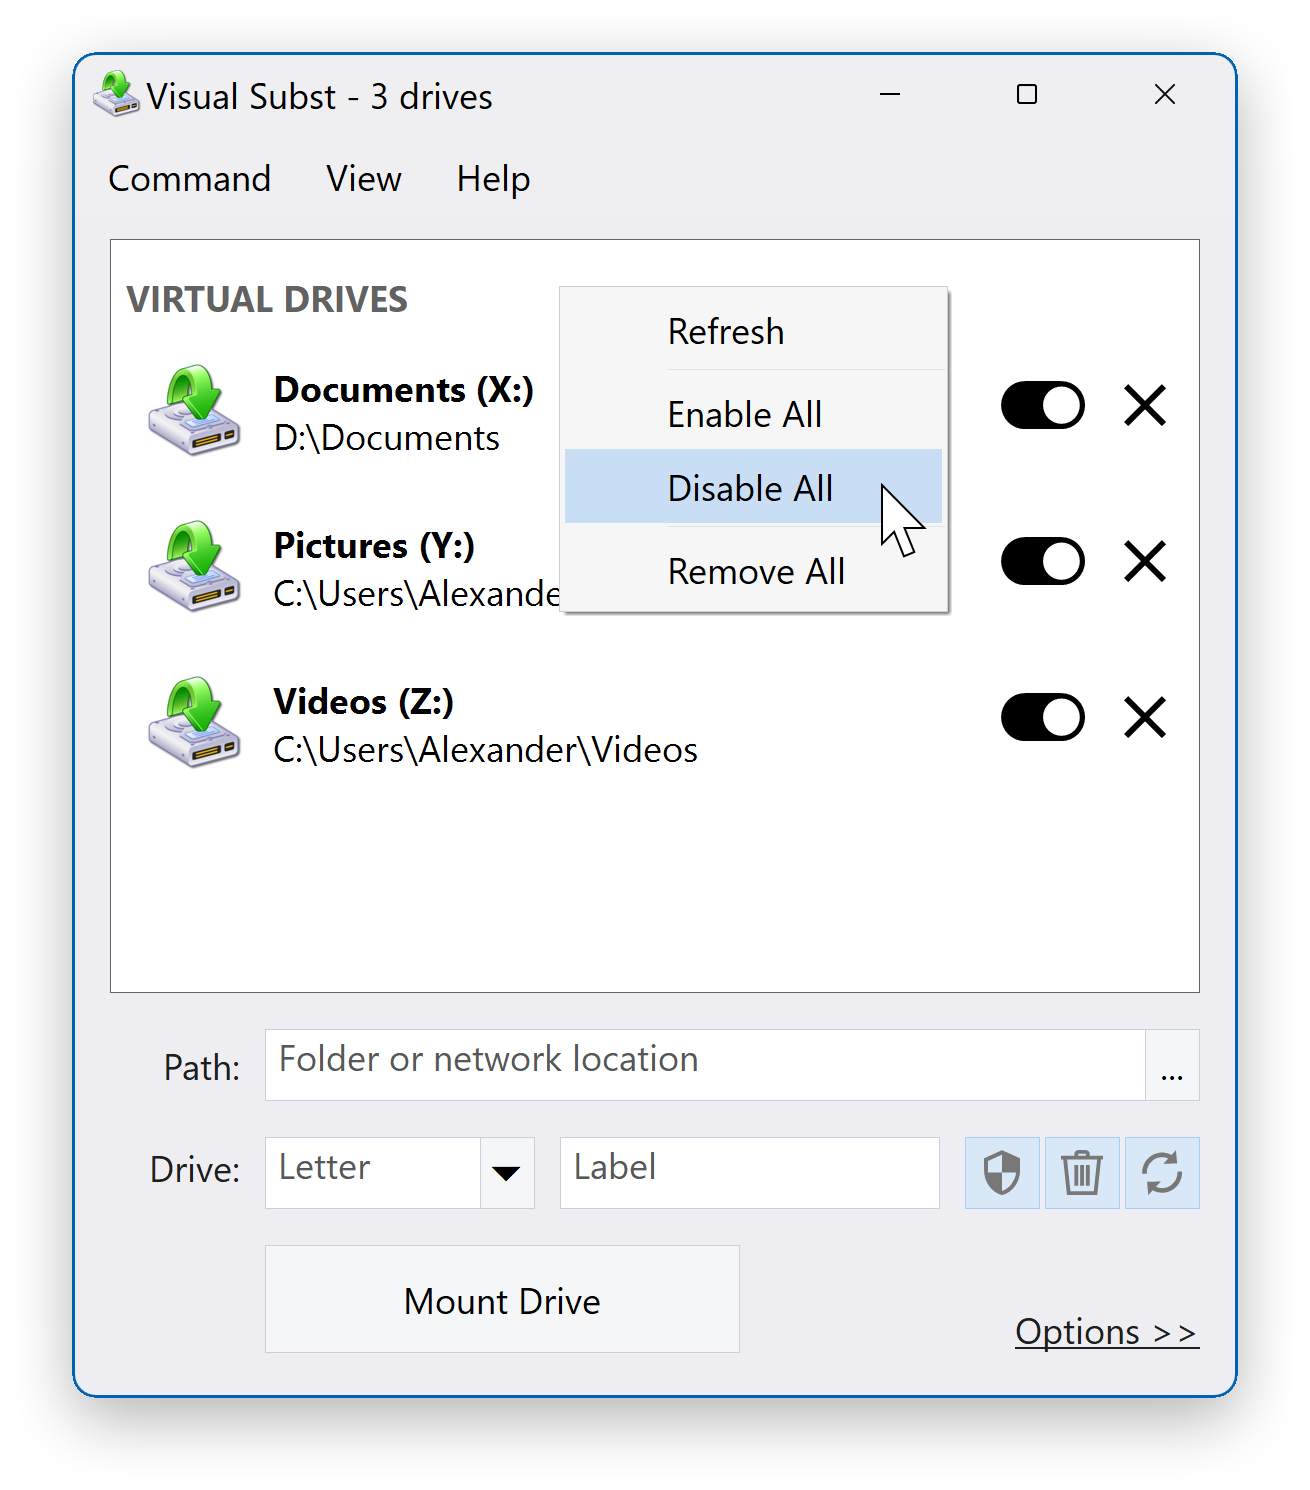 Visual Subst - Disable All Drives